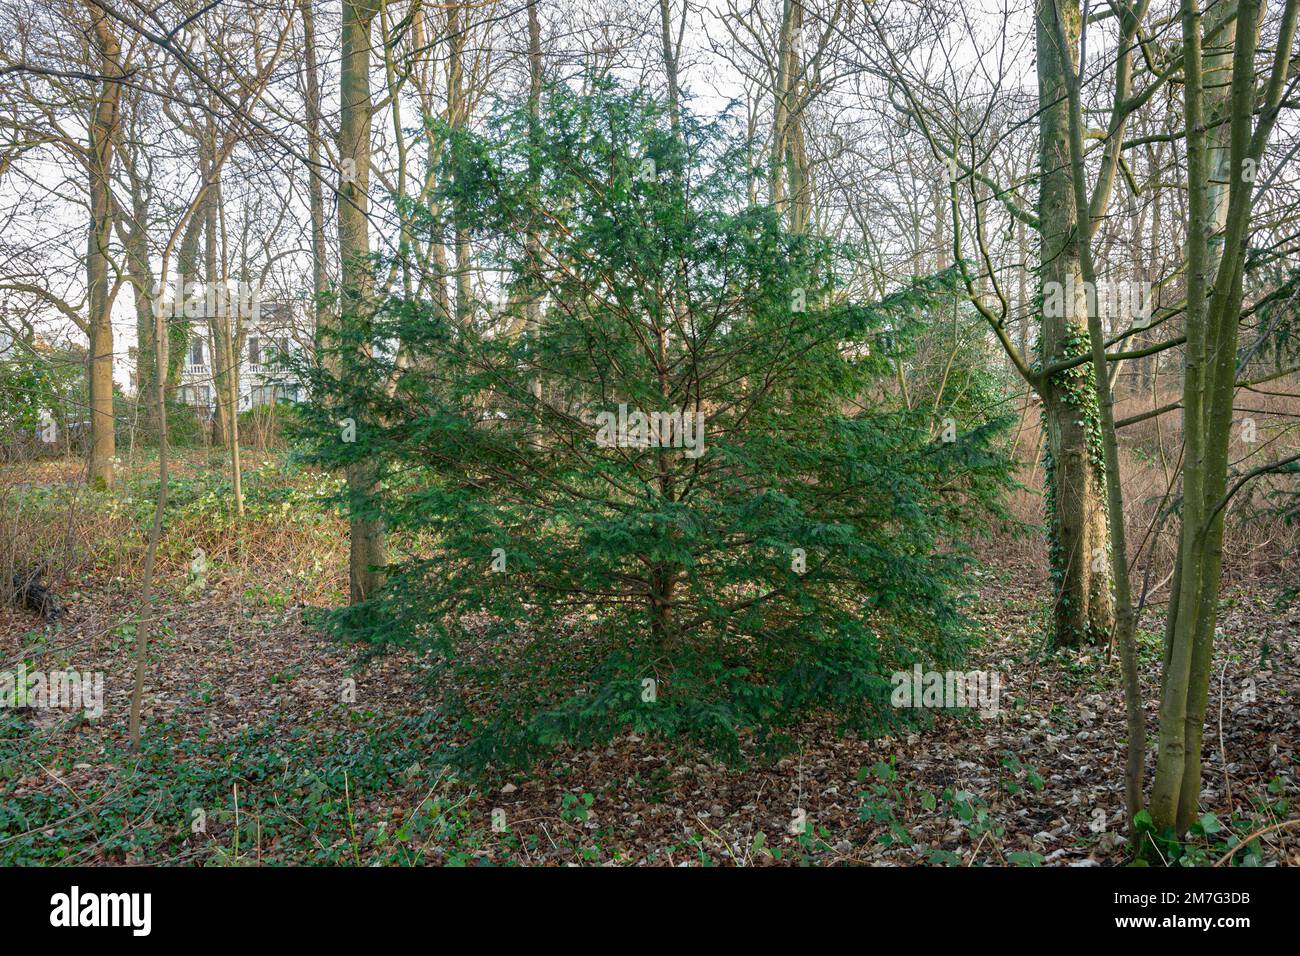 Yew tree (Taxus baccata) growing in the shade below other trees in a park Stock Photo